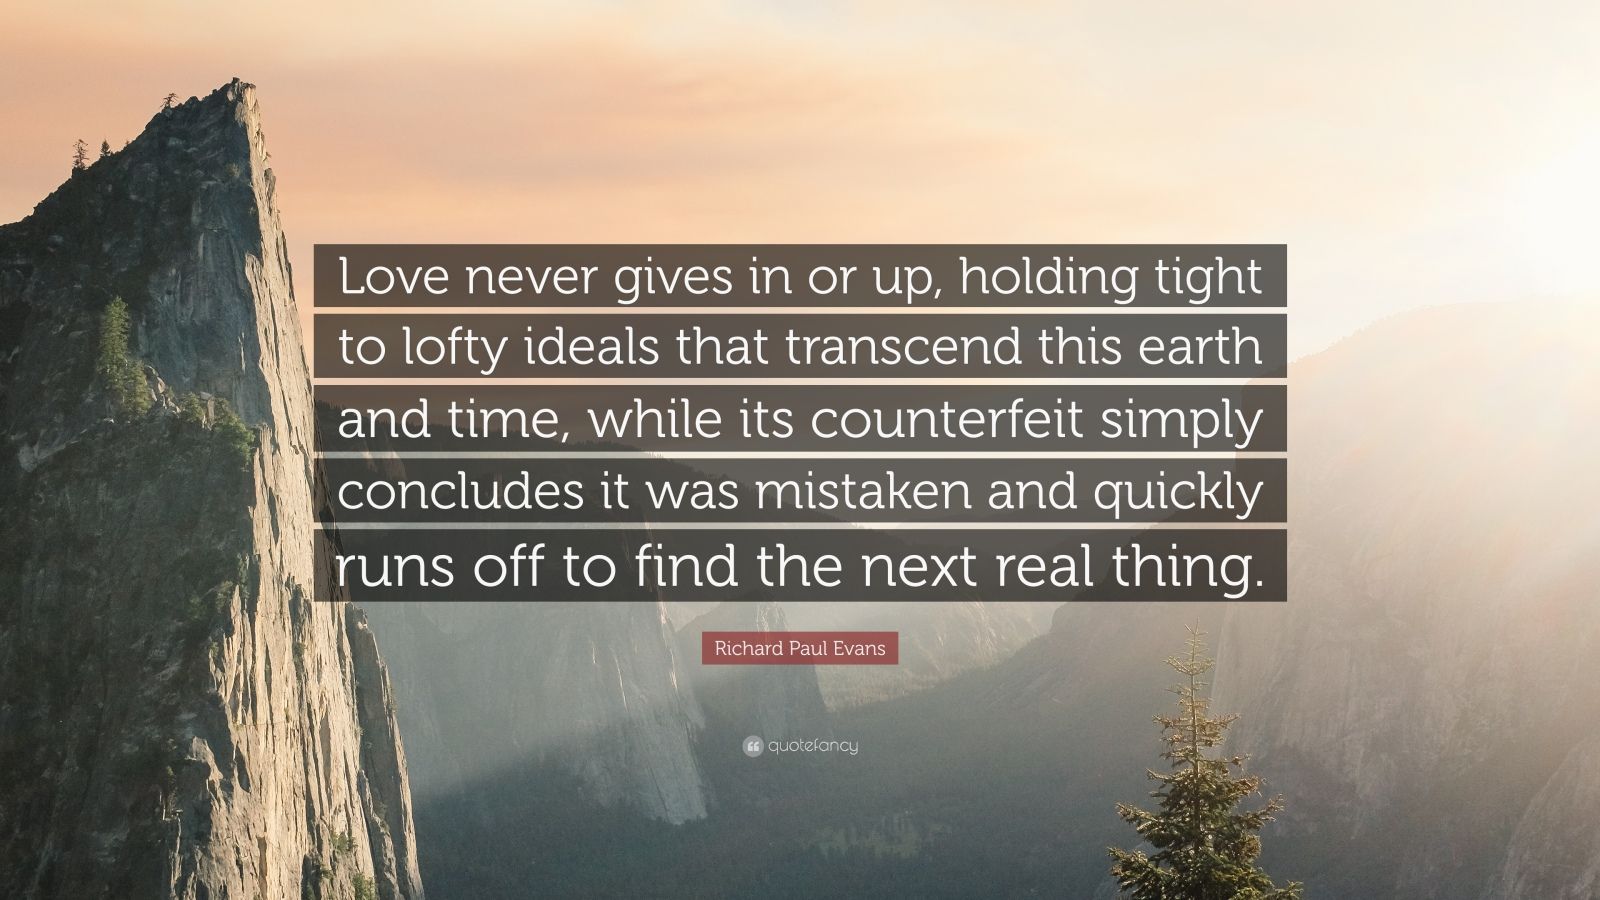 Richard Paul Evans Quote “Love never gives in or up holding tight to